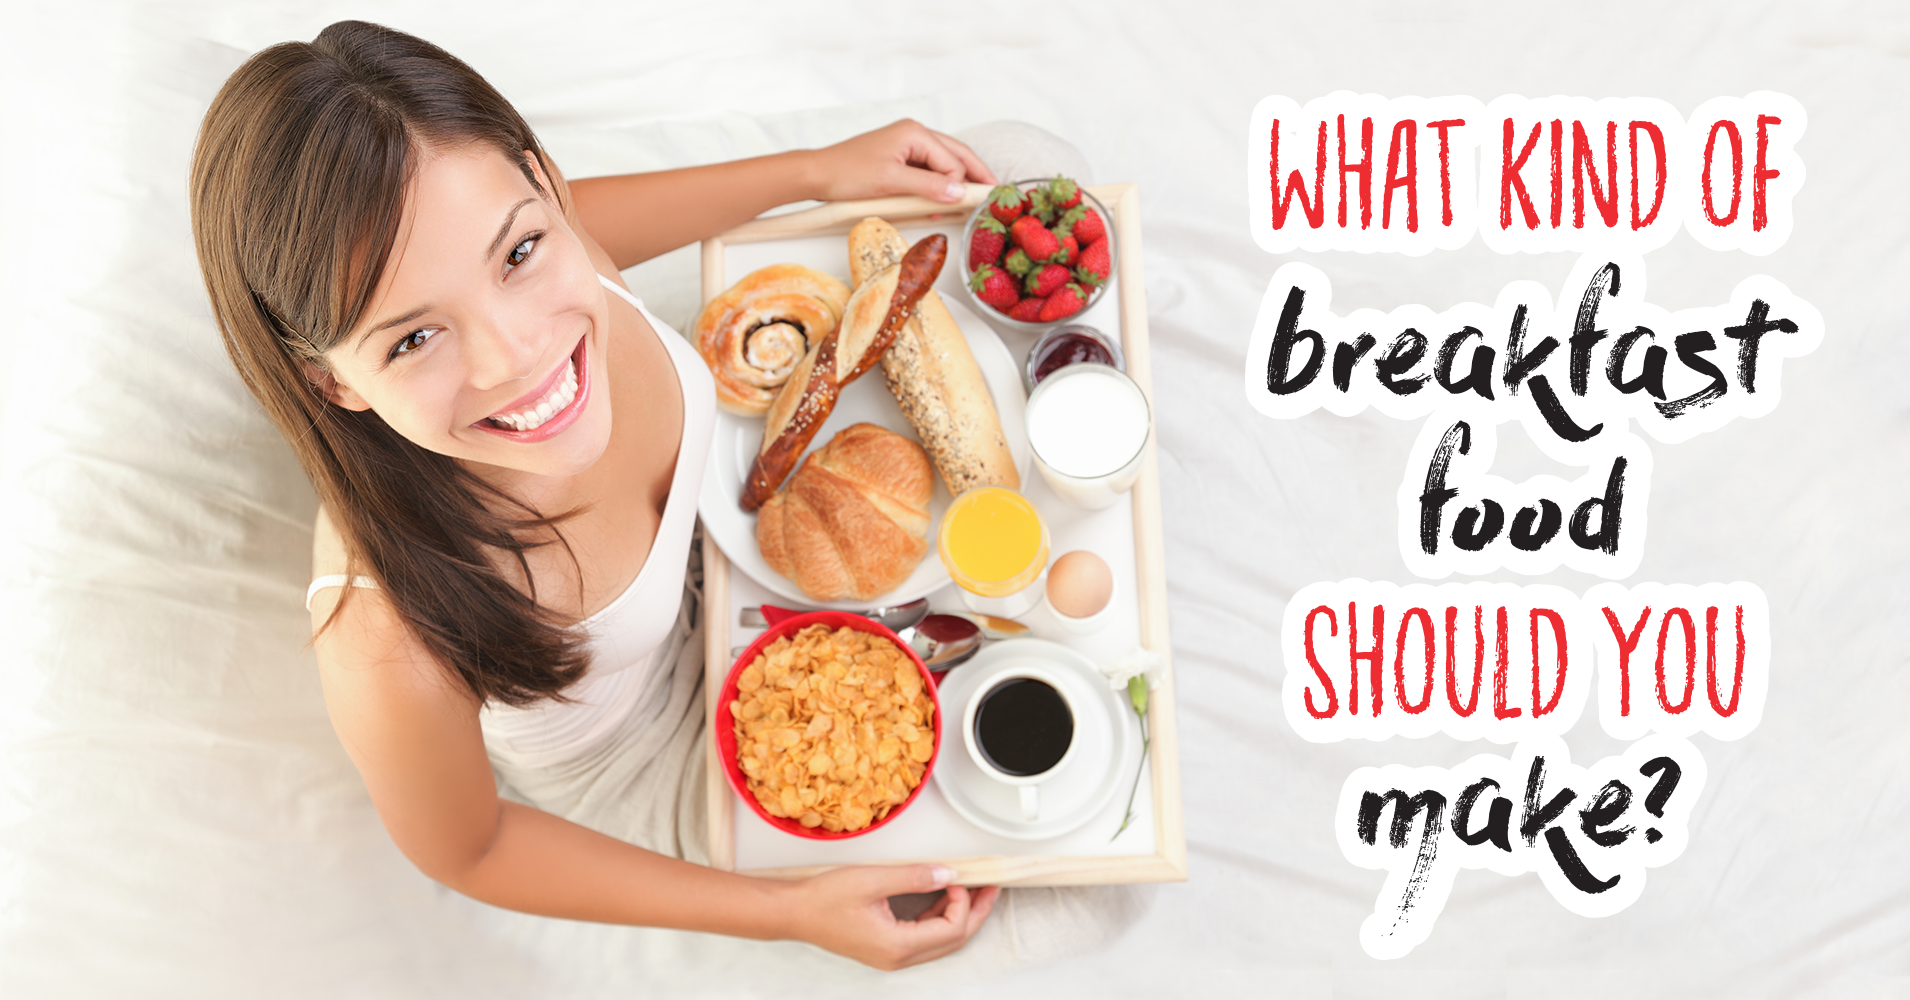 What Kind Of Breakfast Food Should You Make? - Quiz - Quizony.com